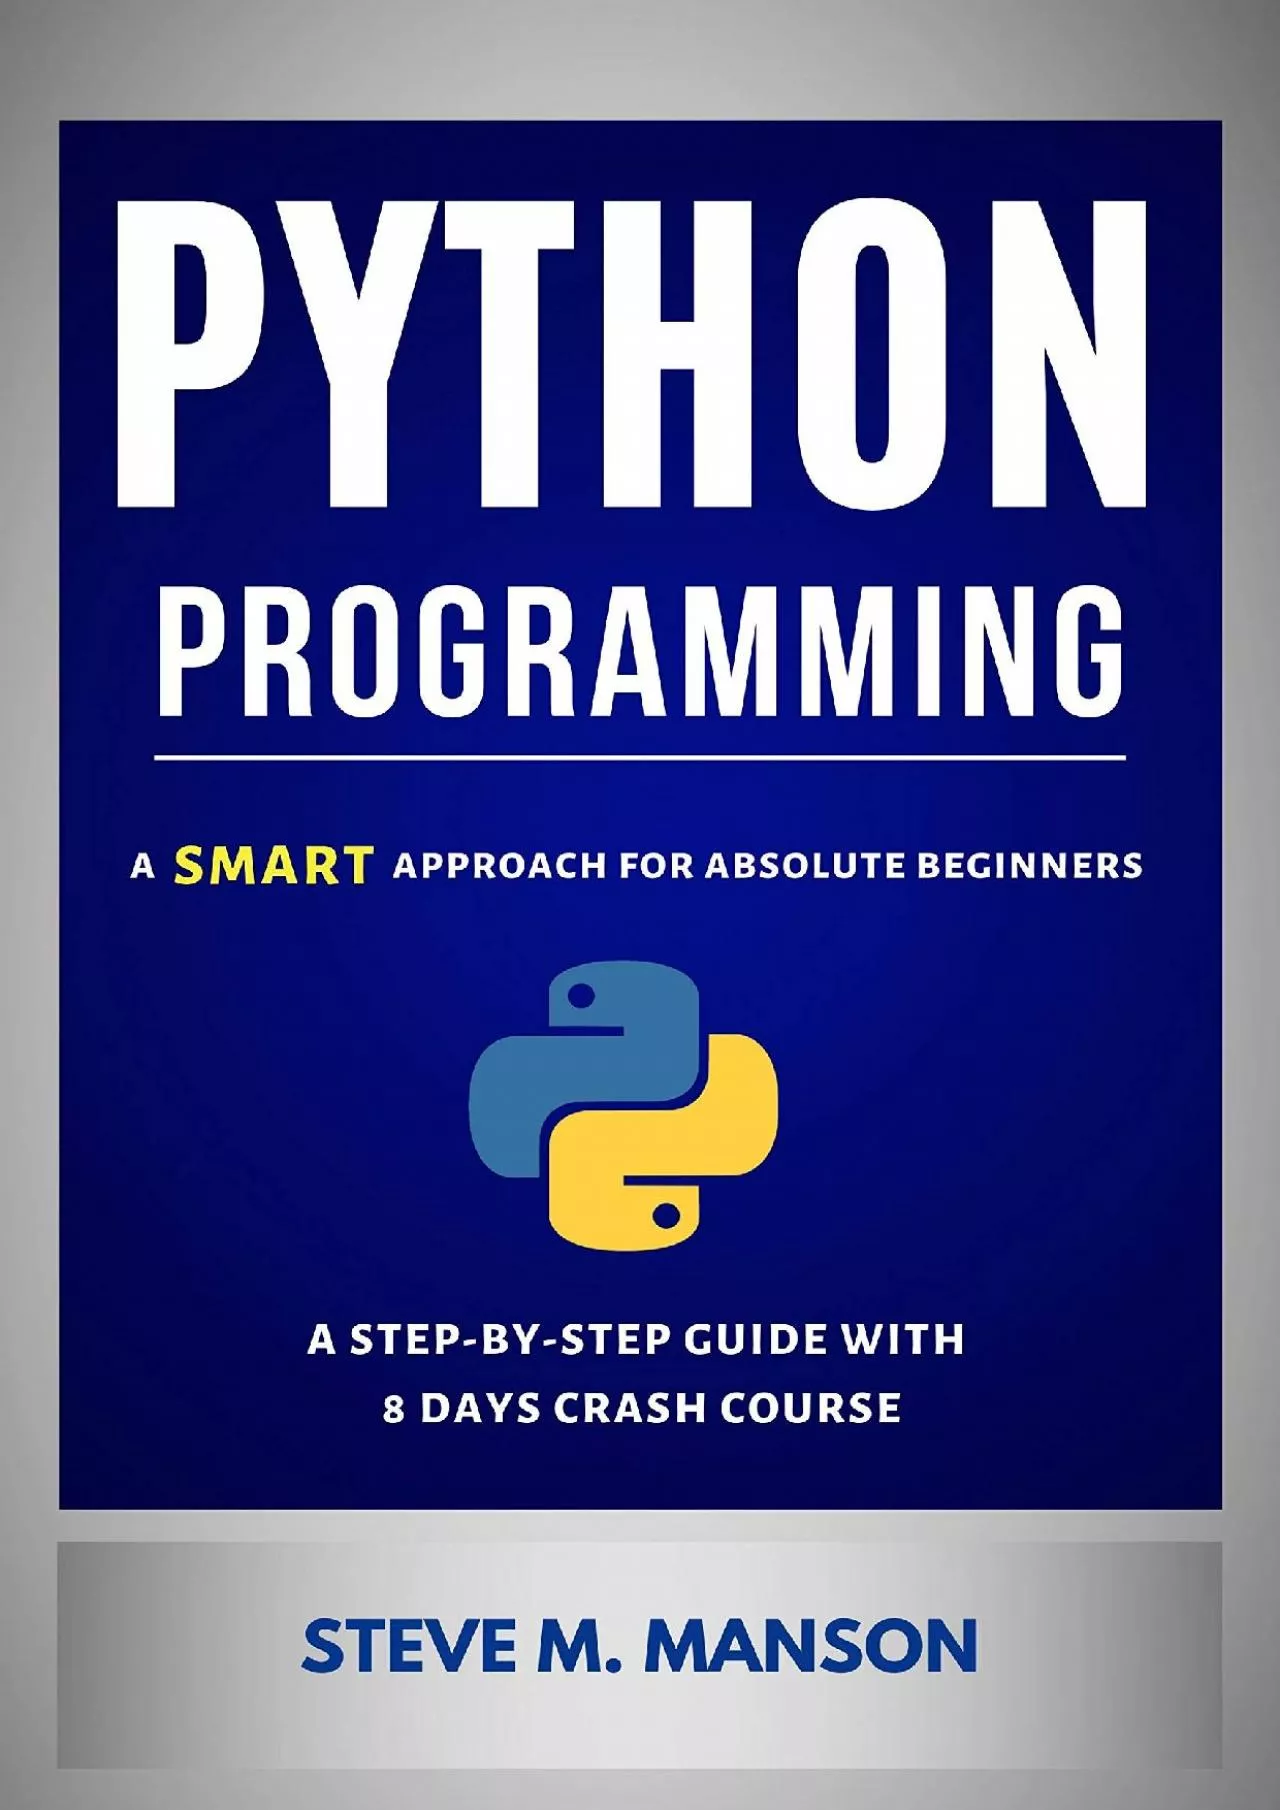 [READ]-Python Programming: A Smart Approach For Absolute Beginners (A Step-by-Step Guide